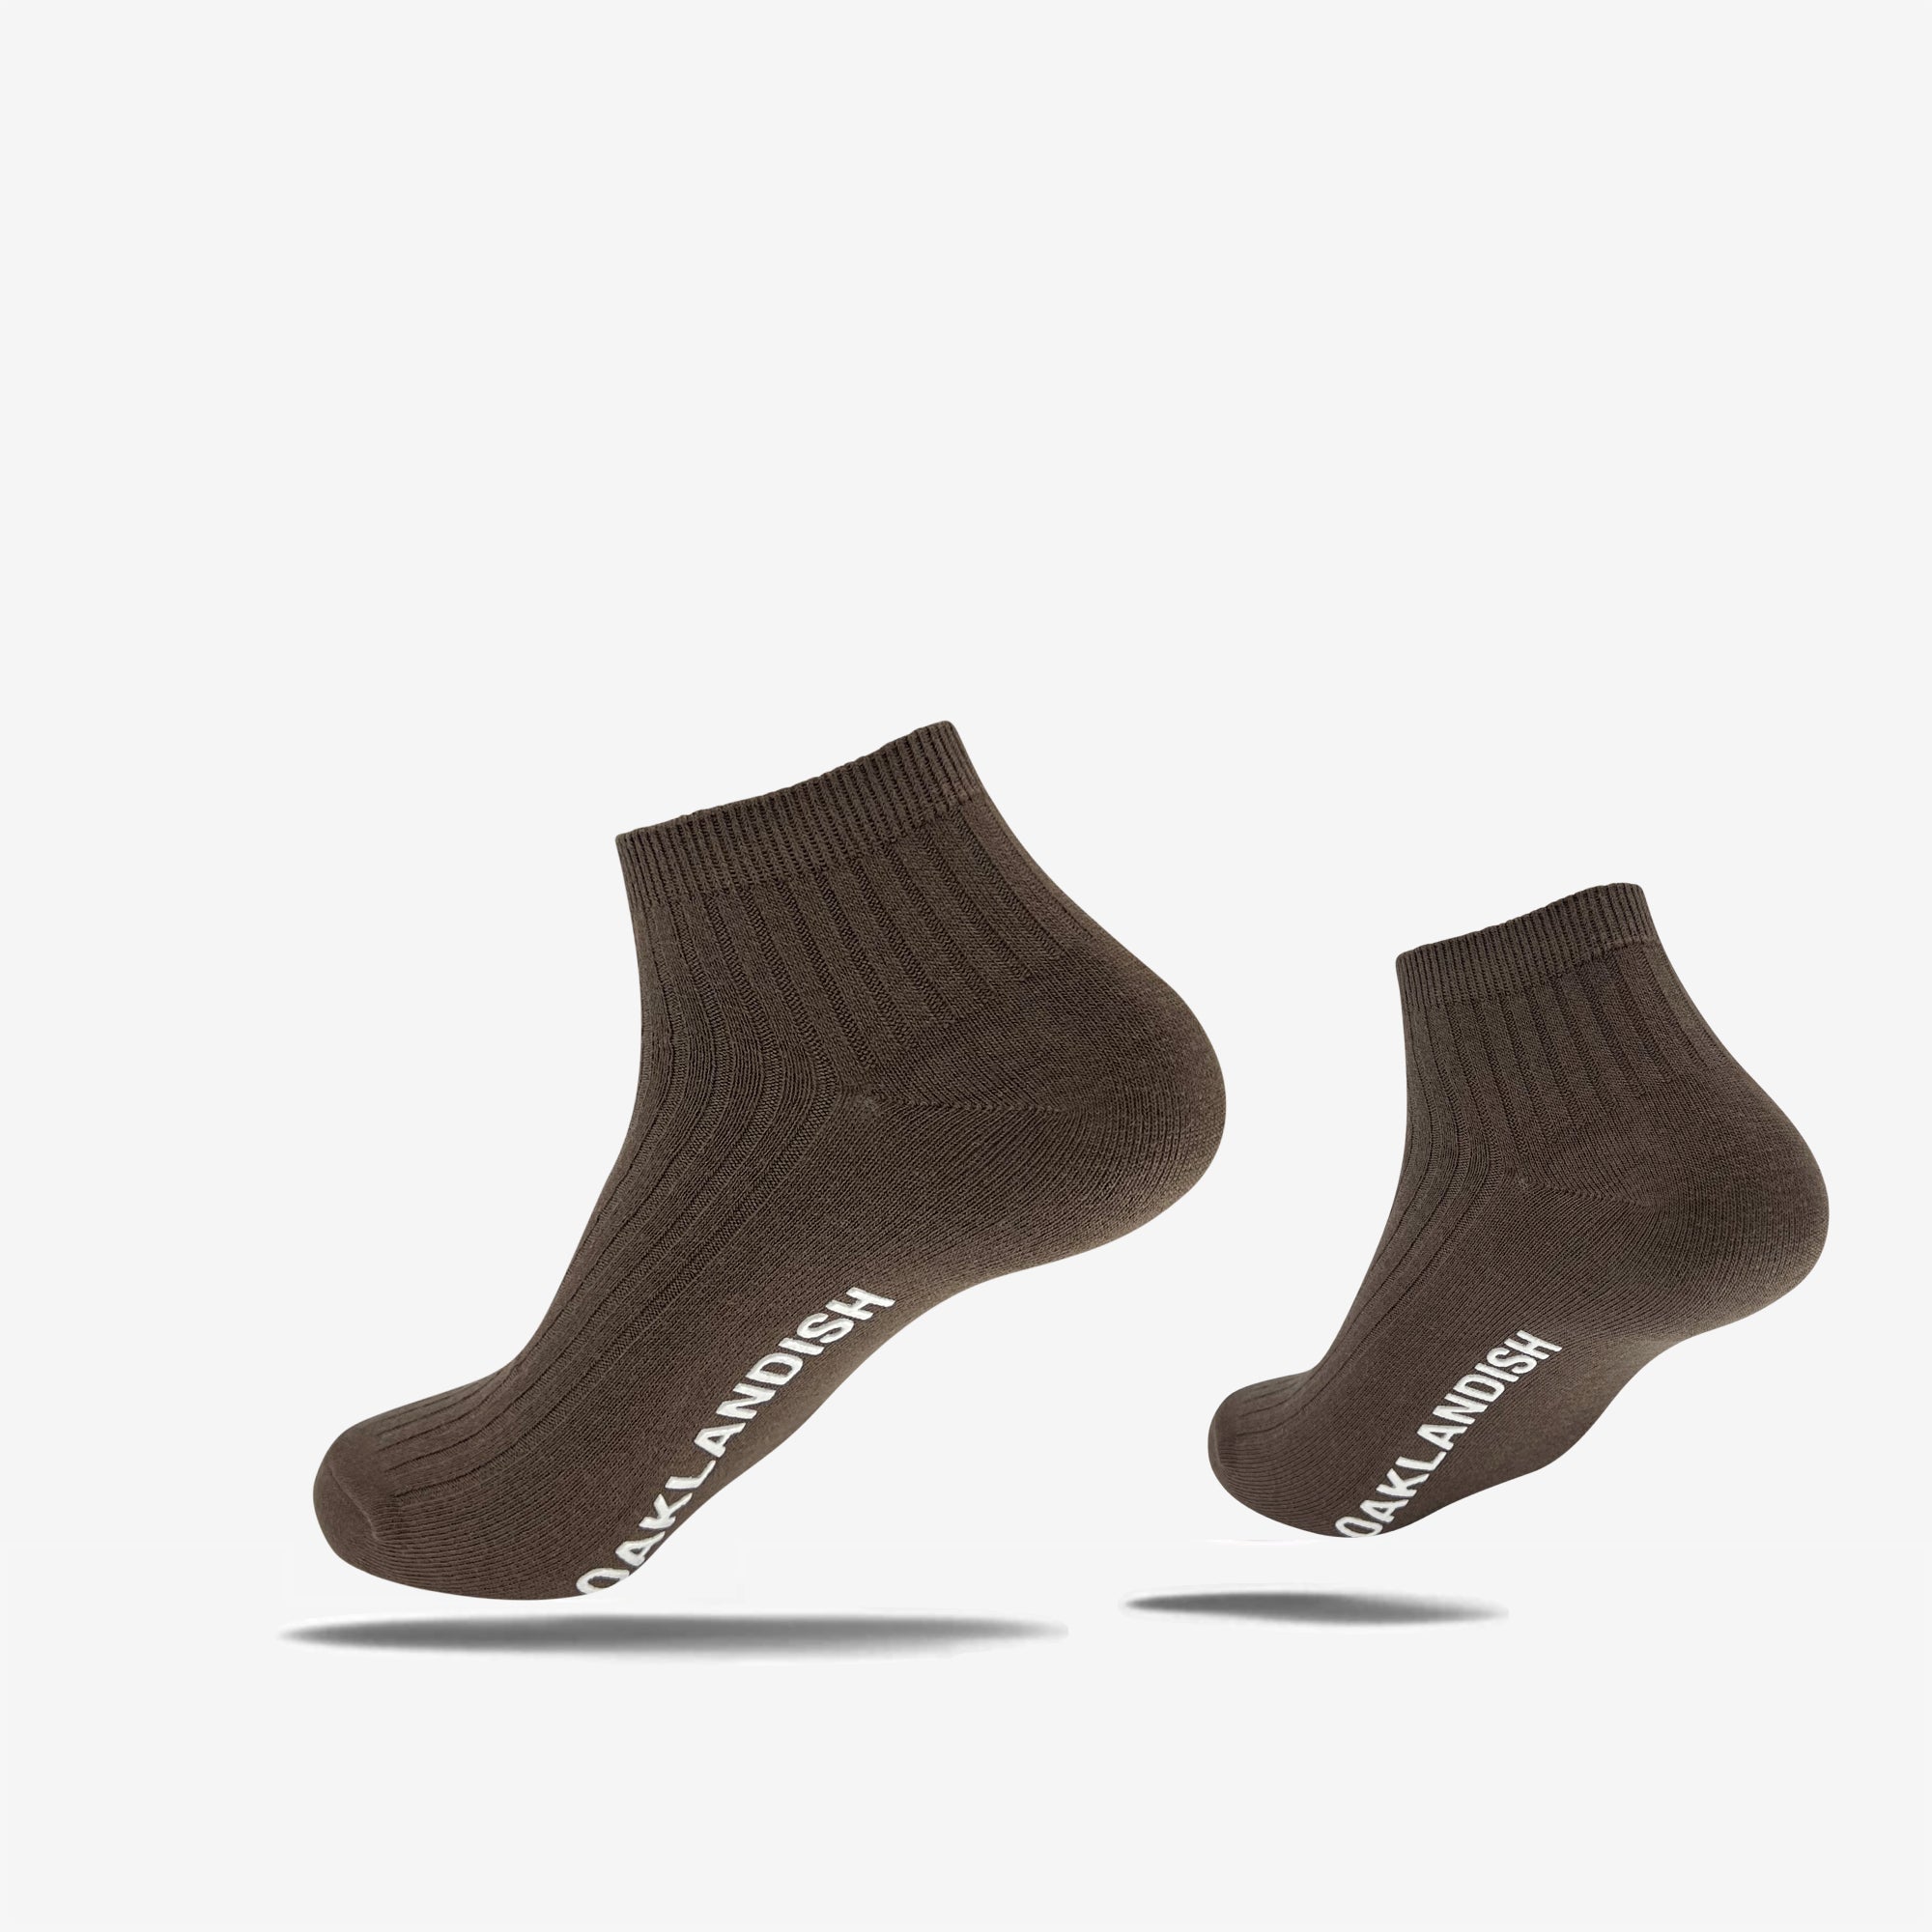 Low-cut crew socks in slate brown with white Oaklandish wordmark on the sole.